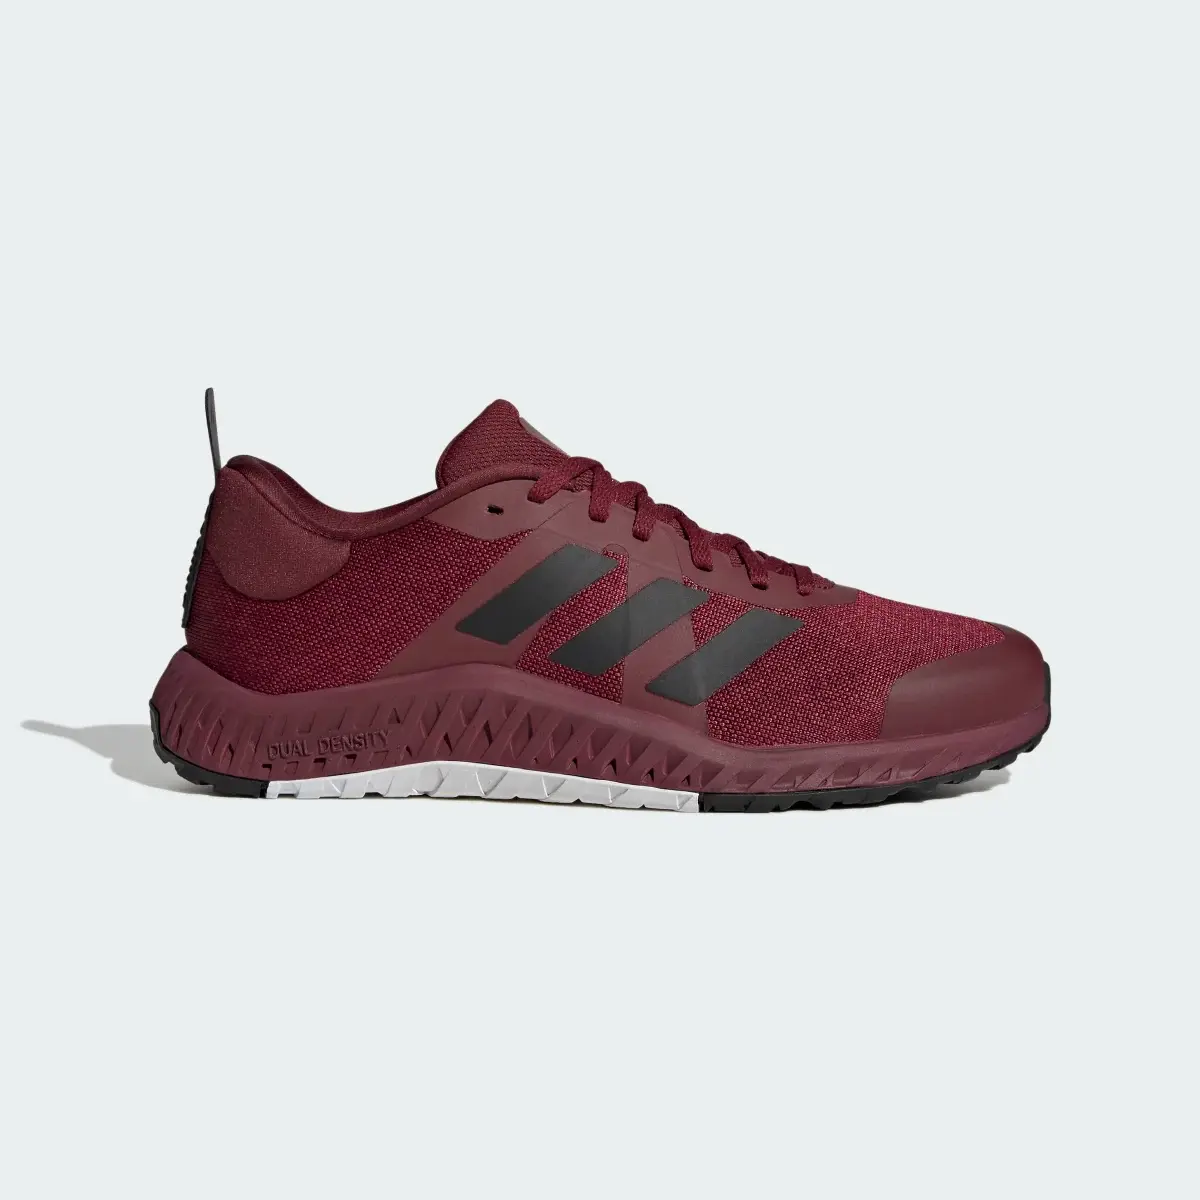 Adidas Everyset Trainer Shoes. 2